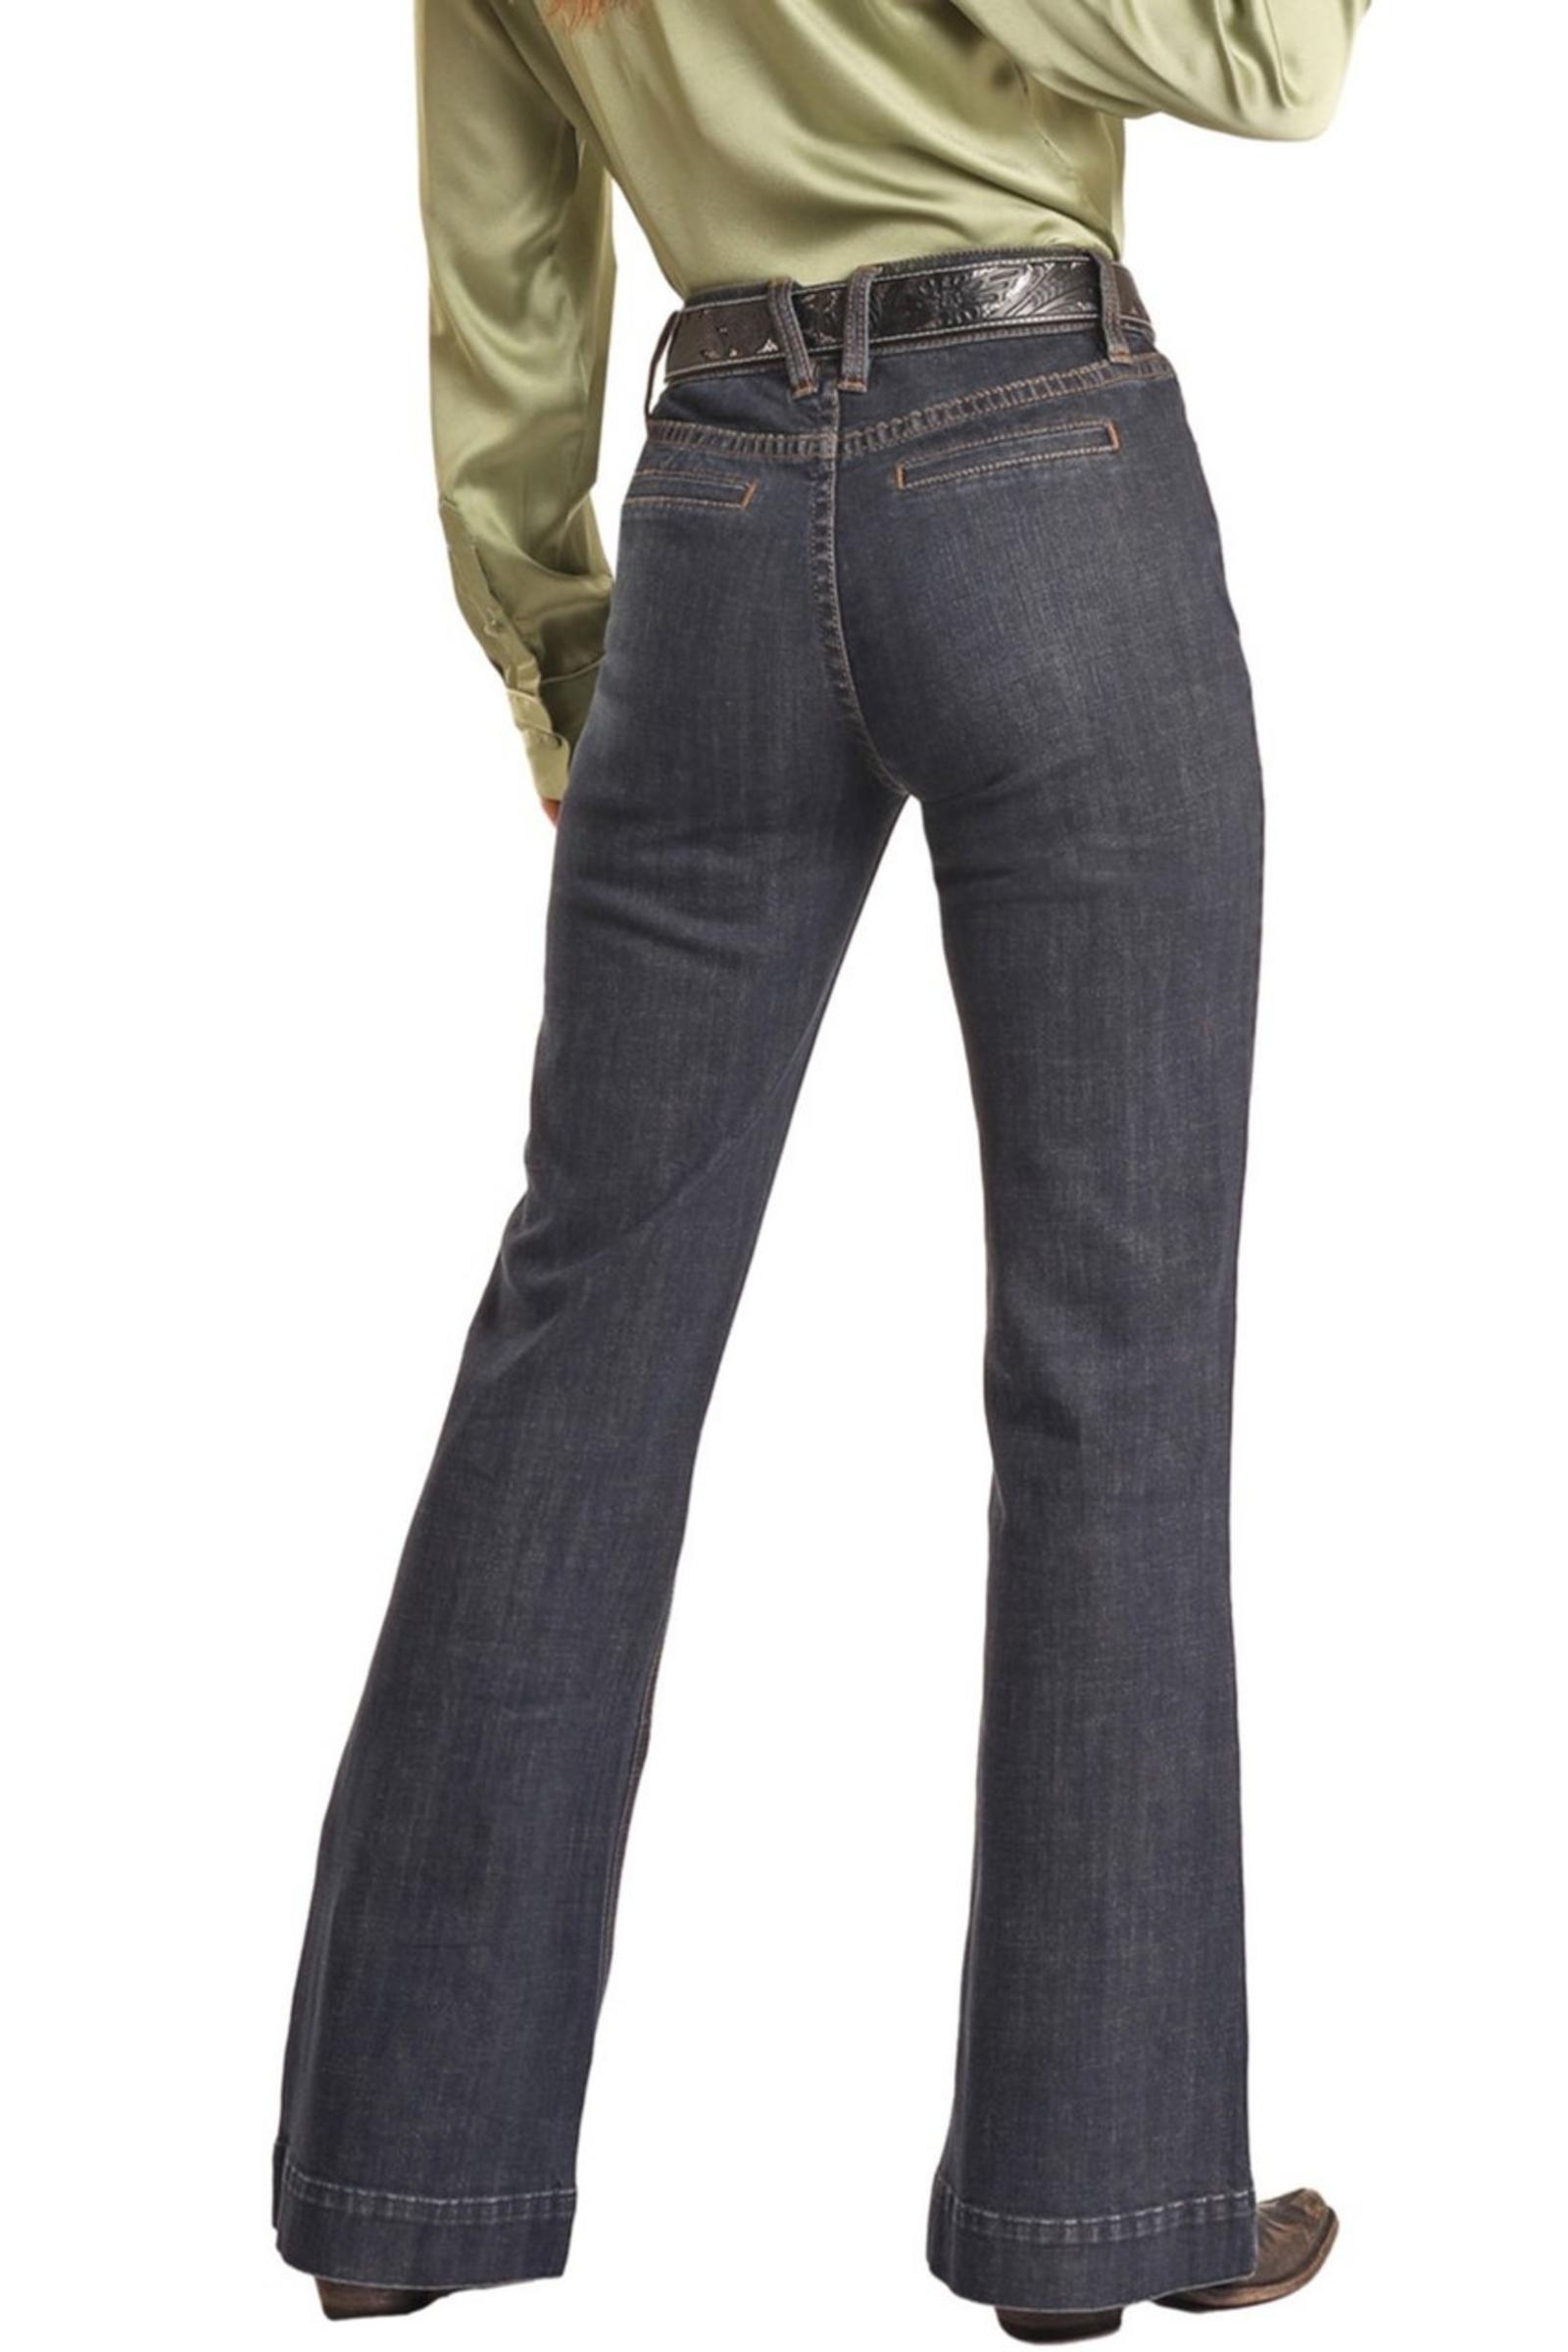 High Rise Stretch Trouser Jeans back